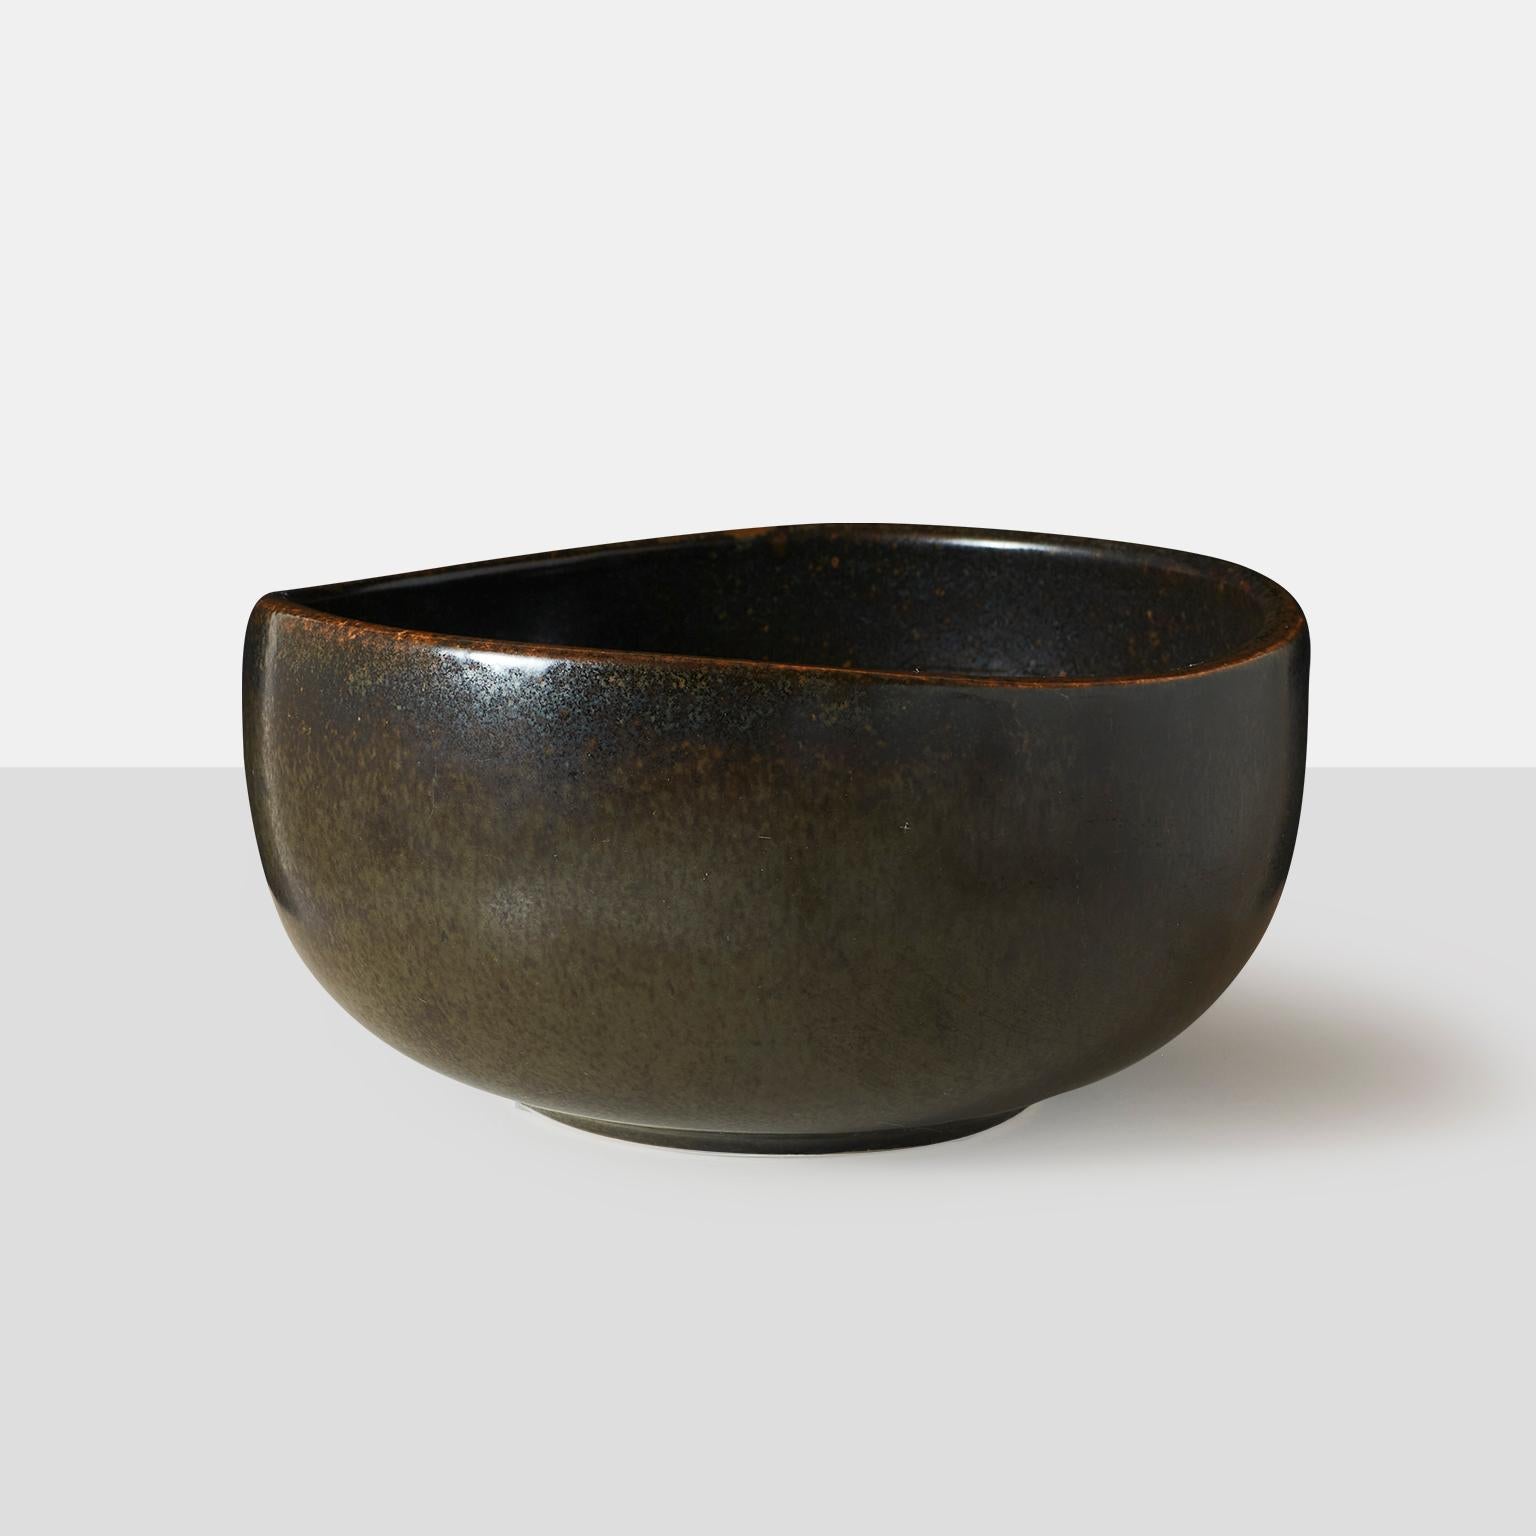 Eva Staehr-Nielsen for SAXBO dark brown glaze, rounded bowl with organic shape. The underside is incised with the artist's initials E.ST.N., stamped Saxbo, Denmark, the ying-yang symbol, 4 dots, the numbers 446 and 8.